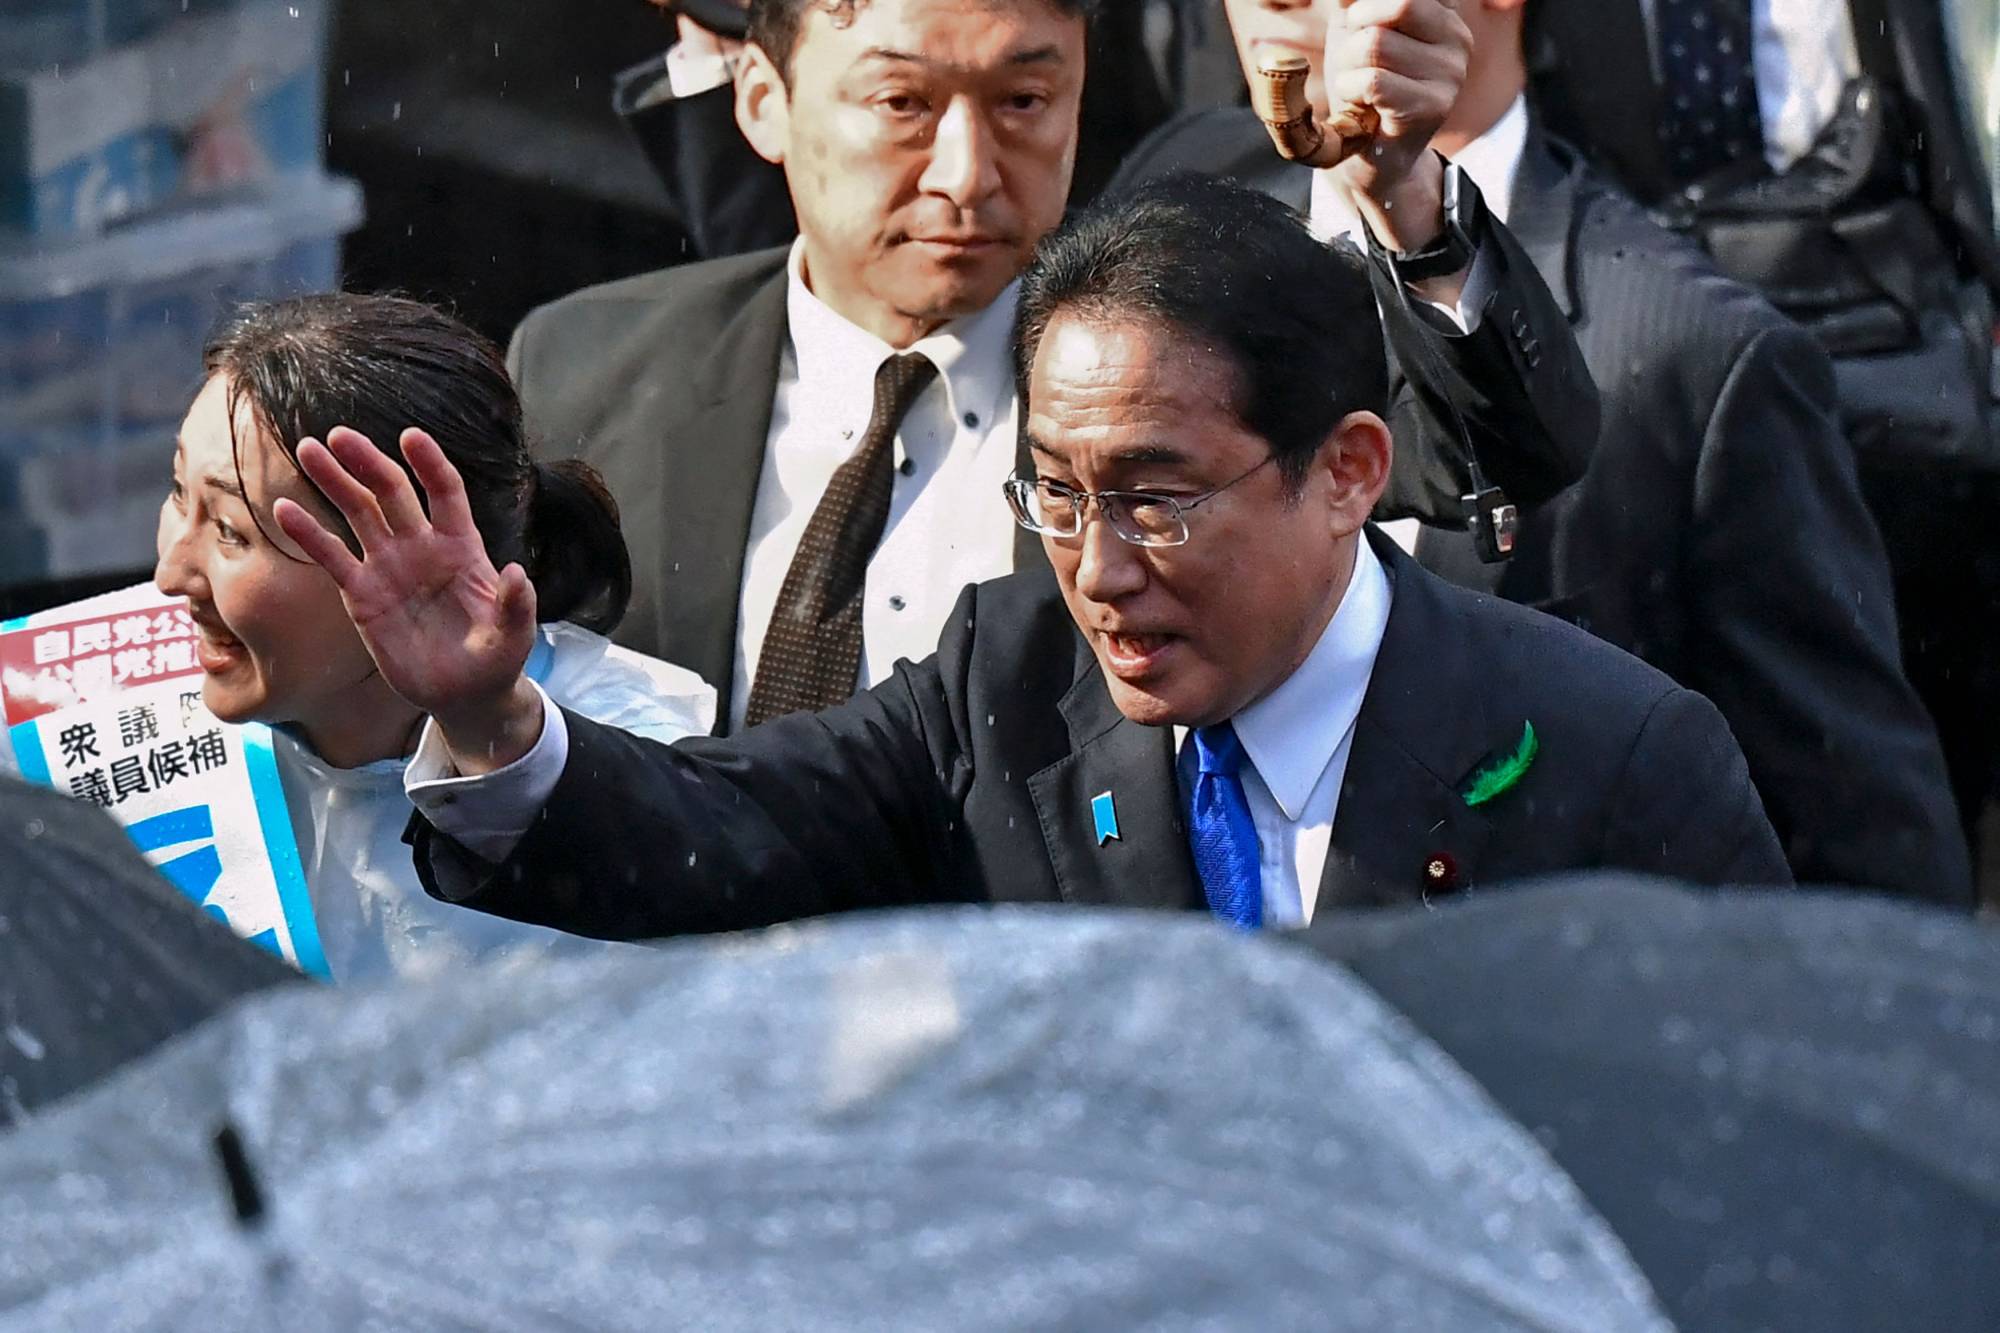 Sources: Police raised concerns about Abe's security detail